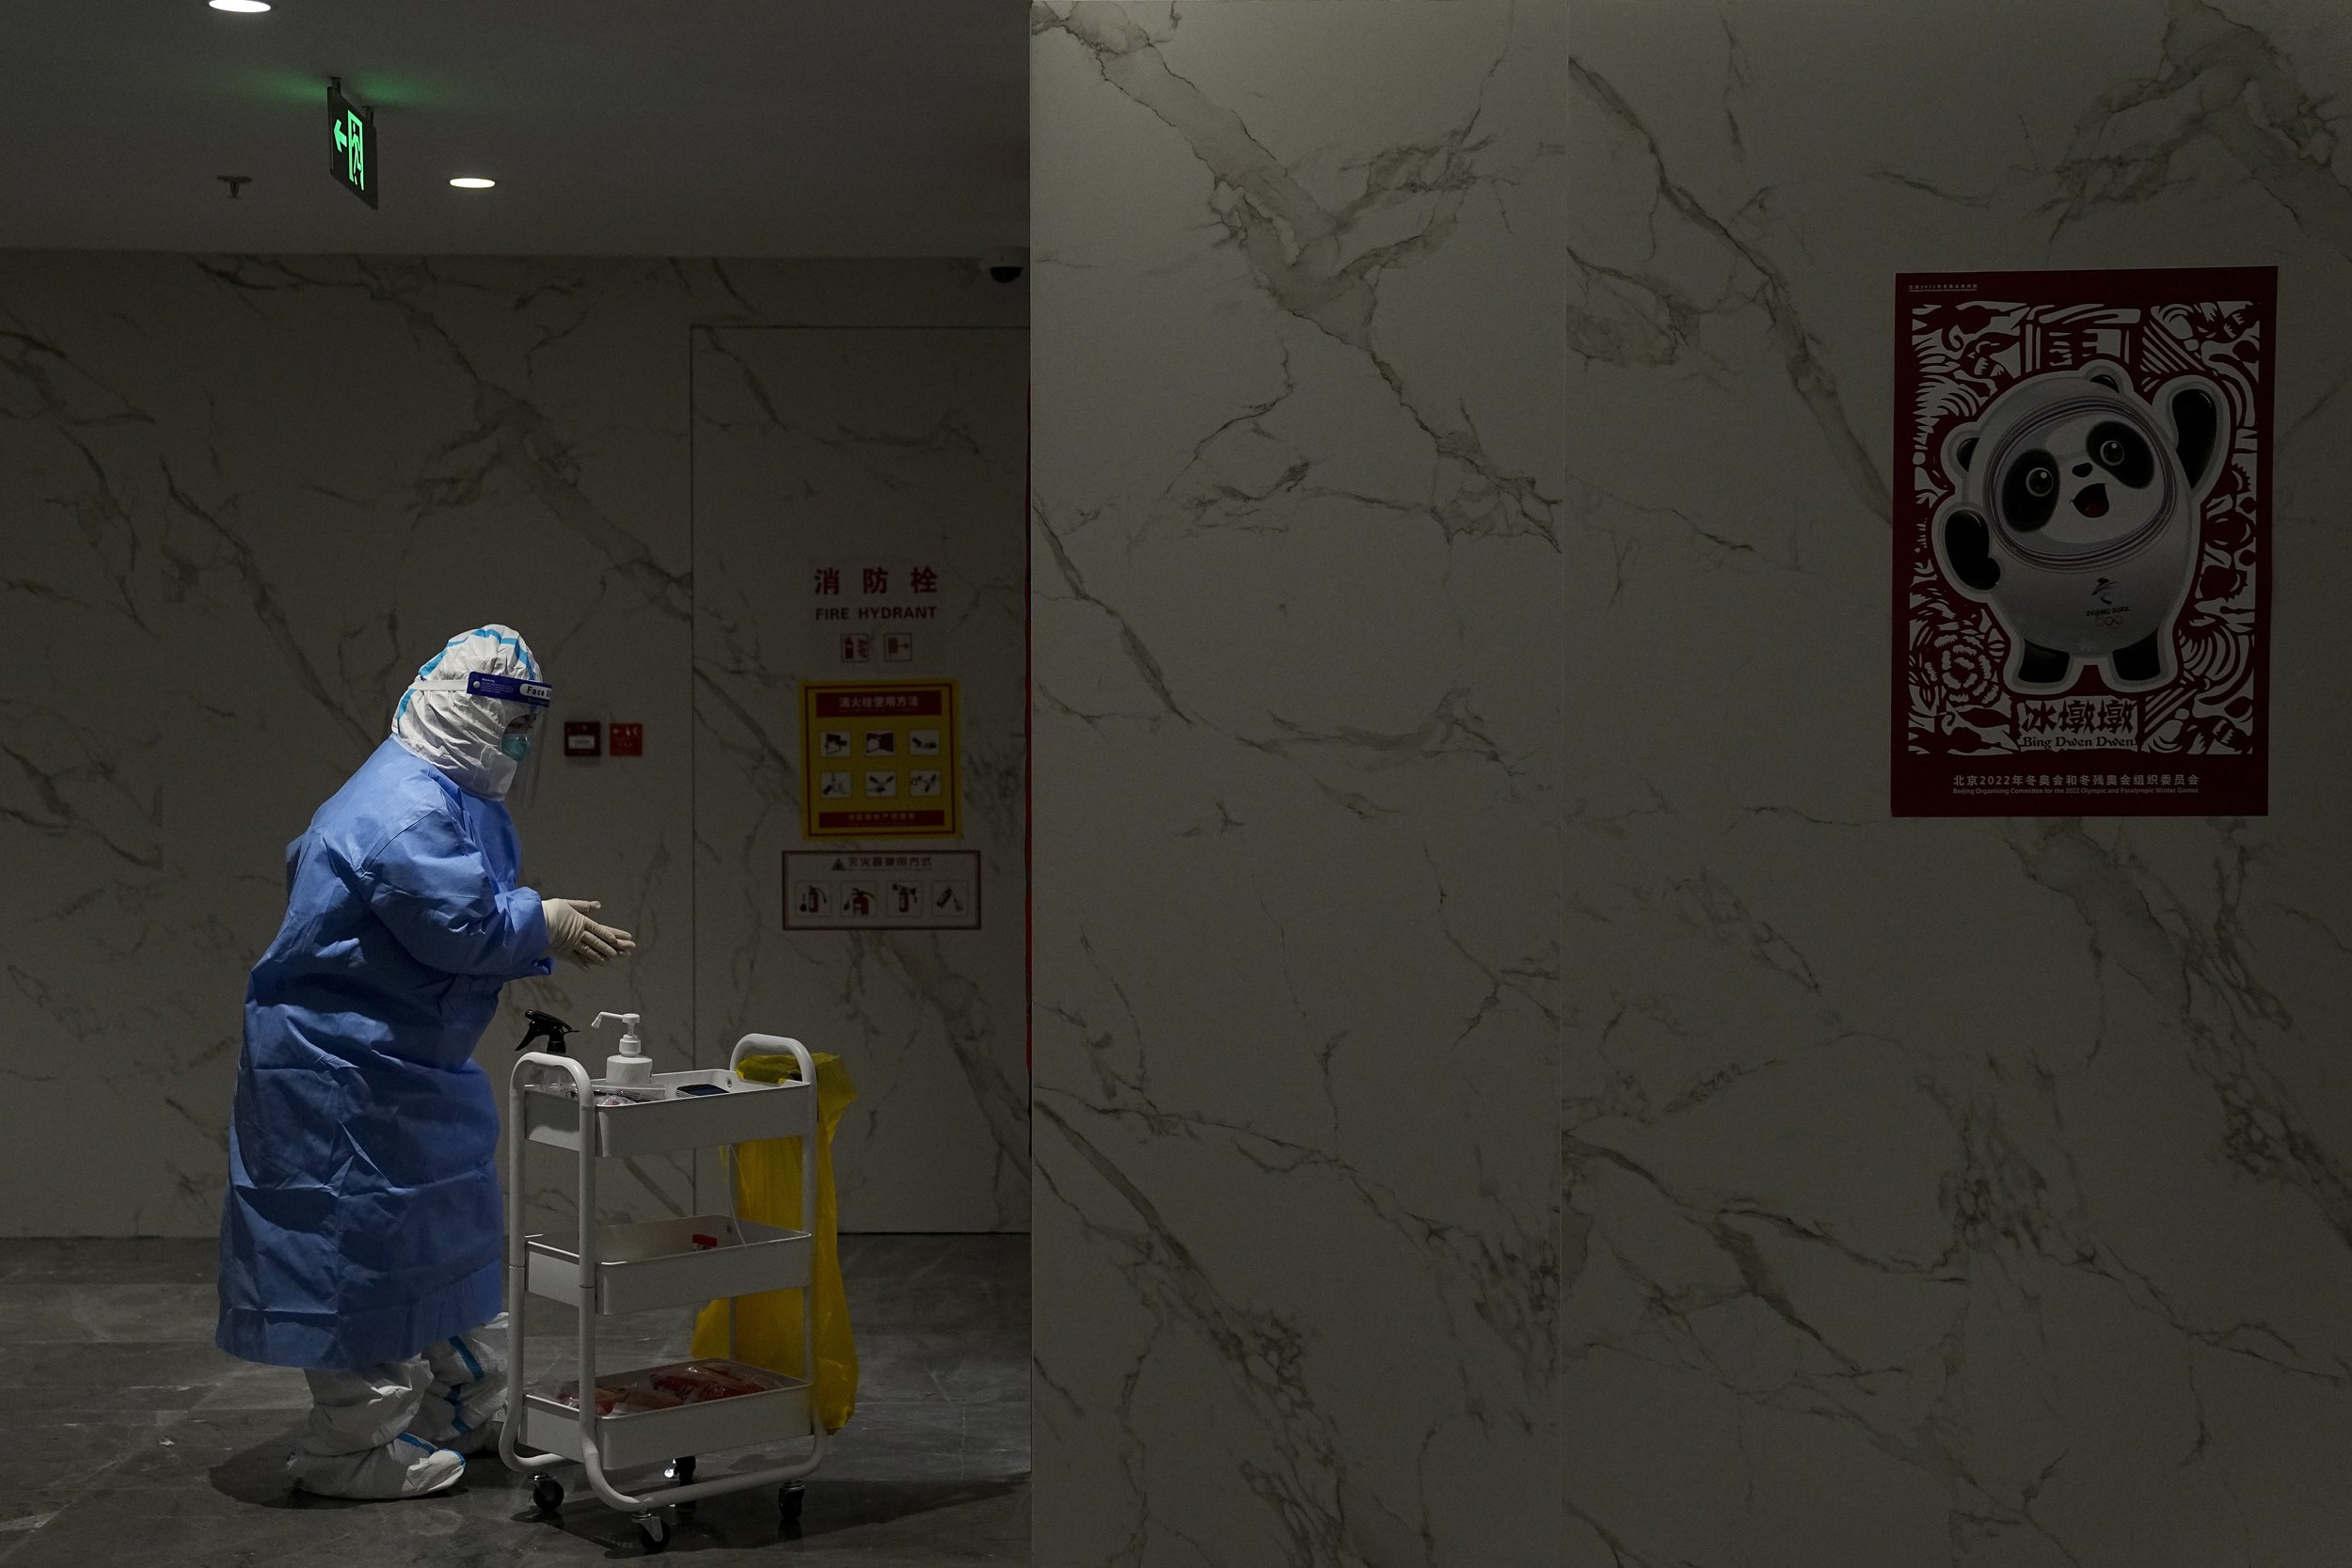  A medical worker disinfects her hands while collecting samples for COVID-19 testing in the main media center at the 2022 Winter Olympics, Friday, Feb. 11, 2022, in Beijing. (AP Photo/Jae C. Hong) 